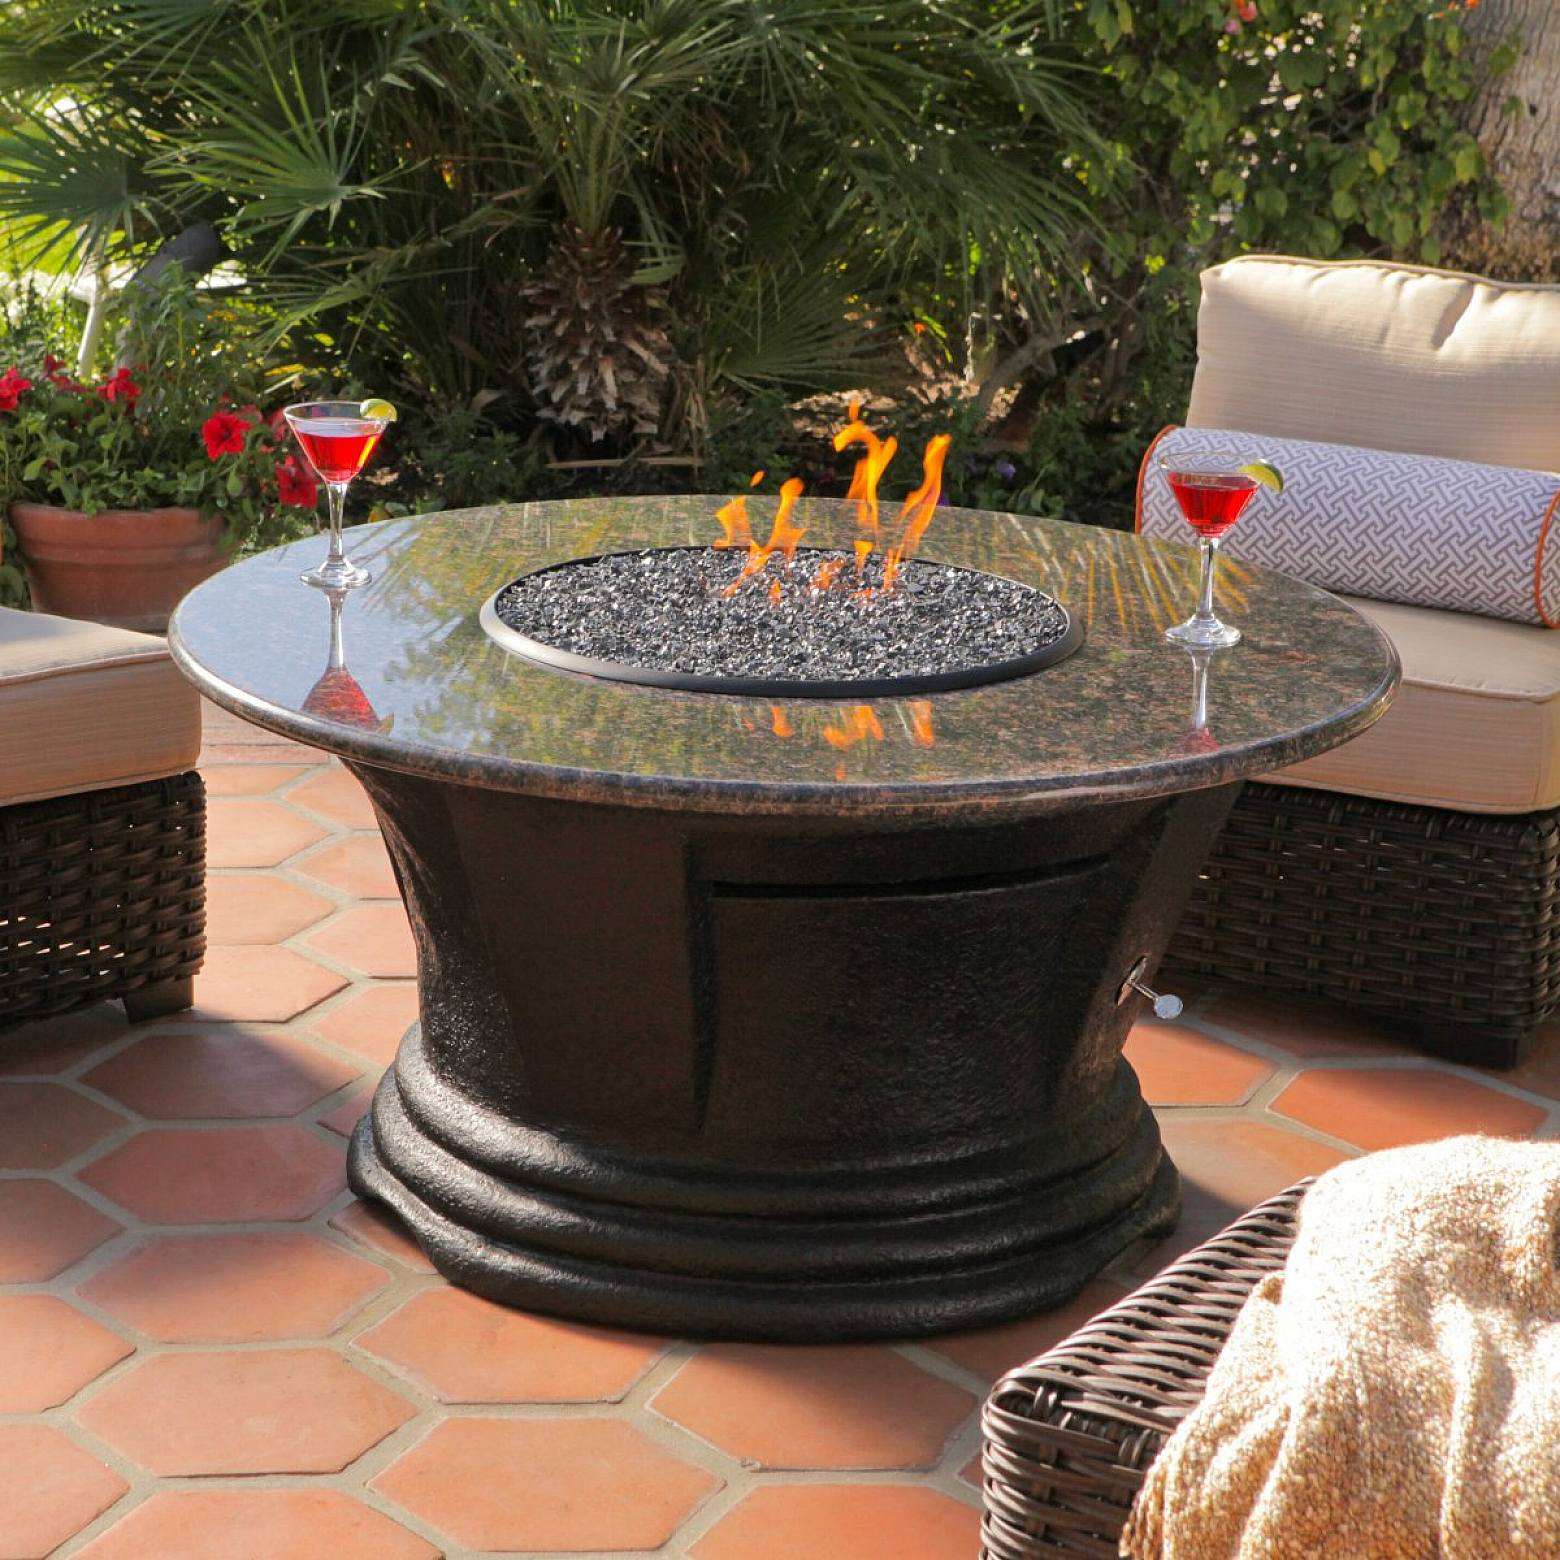 Small Outdoor Propane Fire Pit Fireplace Design Ideas with size 1560 X 1560